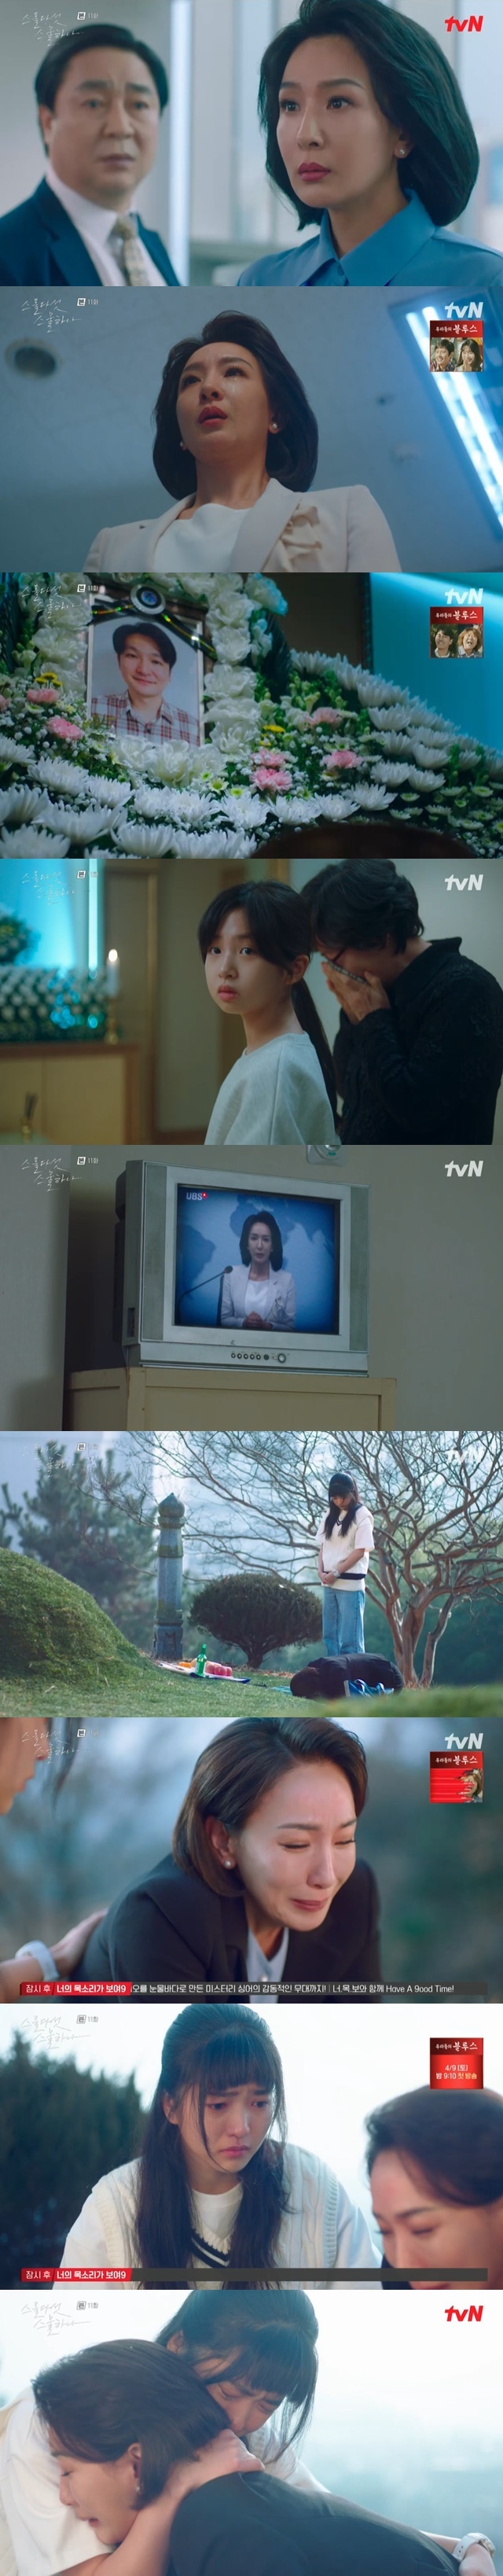 Seo Jae Hee Kim Tae-ri and her mother rang viewers.In the 11th episode of TVNs Saturday drama Twenty Five Twinty One broadcast on March 19 (playplay by Kwon Do-eun/directed by Jung Ji-hyun), the conflict between Shin Jae-kyung (Seo Jae Hee), Na Hee-do (Kim Tae-ri) and her mother and daughter exploded.Na Hee-do proposed to his mother, Shin Jae-kyung, to fix the chair made by his dead father, and Shin Jae-kyung promised to go to the woodworking room together a few days later.However, on the day of the promise, Shin Jae-kyung broke his promise with his daughter Na Hee-do because of the breaking news of the arrest of Shin Chang-won.Na Hee-do, who was trying to move the chair alone, dropped it and said to his mother, Shin Jae-kyung, I should have come if I had time to drink.So Shin Jae-kyung said, Suddenly, it was because of the breaking news. I was breaking news. Come to you? Because appointment with you is more important? I am your mother, but I am also an anchor.I am like you are in a fight, even if you are sad and sick. I knew you would.Im always ready to be disappointed, he said.You wanted me to grow up fast for that reason, Na Hee-do said. Im 13 years old.Shes still 13 years old because she doesnt understand the breaking news. Shes right. I dont even want to understand.I didnt know that at the time, he said. What does it mean that my mother didnt come to Father The Funeral?But as I was a year old, I knew exactly what it meant: the more I knew, the more hurt I was, and the more hurt I felt, the more hurt I felt in my latest edition.In 1993, Shin Jae-kyung received a call from a hospital saying his husband was in critical condition in the crisis of missing the difficult anchor position.Shin was about to run to the hospital when he was about to run to the hospital and when the news of the plane crash broke out, he took charge of the breaking news to prove his place.Shin Jae-kyung recalled the time and told her daughter Na Hee-do, Youre just missing your father, arent you? Im not. Im .80. Ive been doing it all along.I cant help but avoid it, and Ive forgotten it, and I dont want you to understand it now, but dont blame my efforts to avoid it, because thats how I stand.The next day, Na Hee-do met her fathers chair and found it while she was looking for it, and she shed tears.When Lee Jin had no chair, he advised Na Hee-do to make a chair himself, and Na Hee-do went to the woodworking office and made a chair, and found out that Shin Jae-kyung, who was late, left the chair in the woodworking office and tried to fix it.In addition, Shin Jae-kyung Nahee also headed for oxygen together with the mother and daughter, and the conflict between the mother and daughter ended.Shin Jae-kyung, who bowed to her husbands oxygen, said to her daughter Na Hee-do, Is you really 13 years old? I wanted to talk when you were big?I actually miss your father so much, I miss him so much. Na Hee-do soothed her mother, Shin Jae-kyung, and shed tears, Mom, I miss him so much.